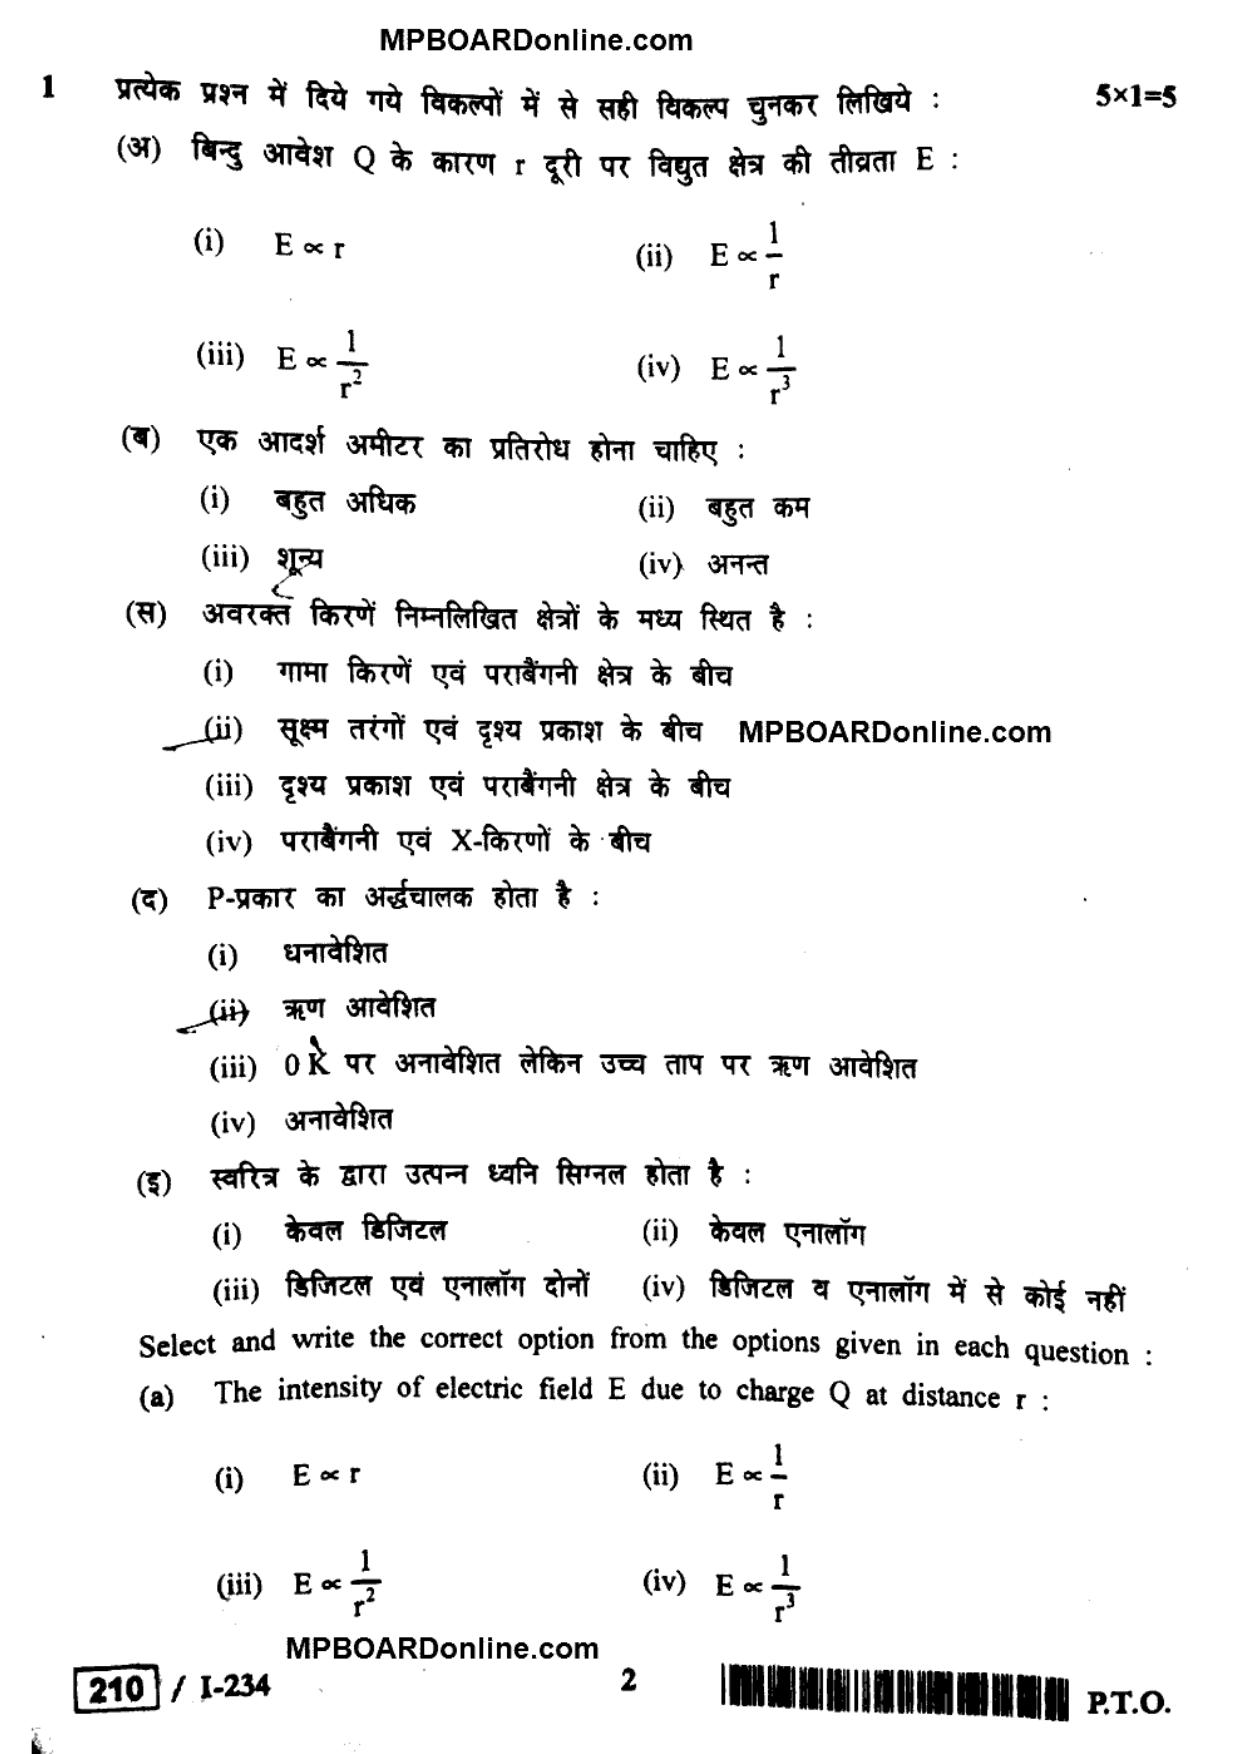 MP Board Class 12 Physics 2018 Question Paper - Page 2